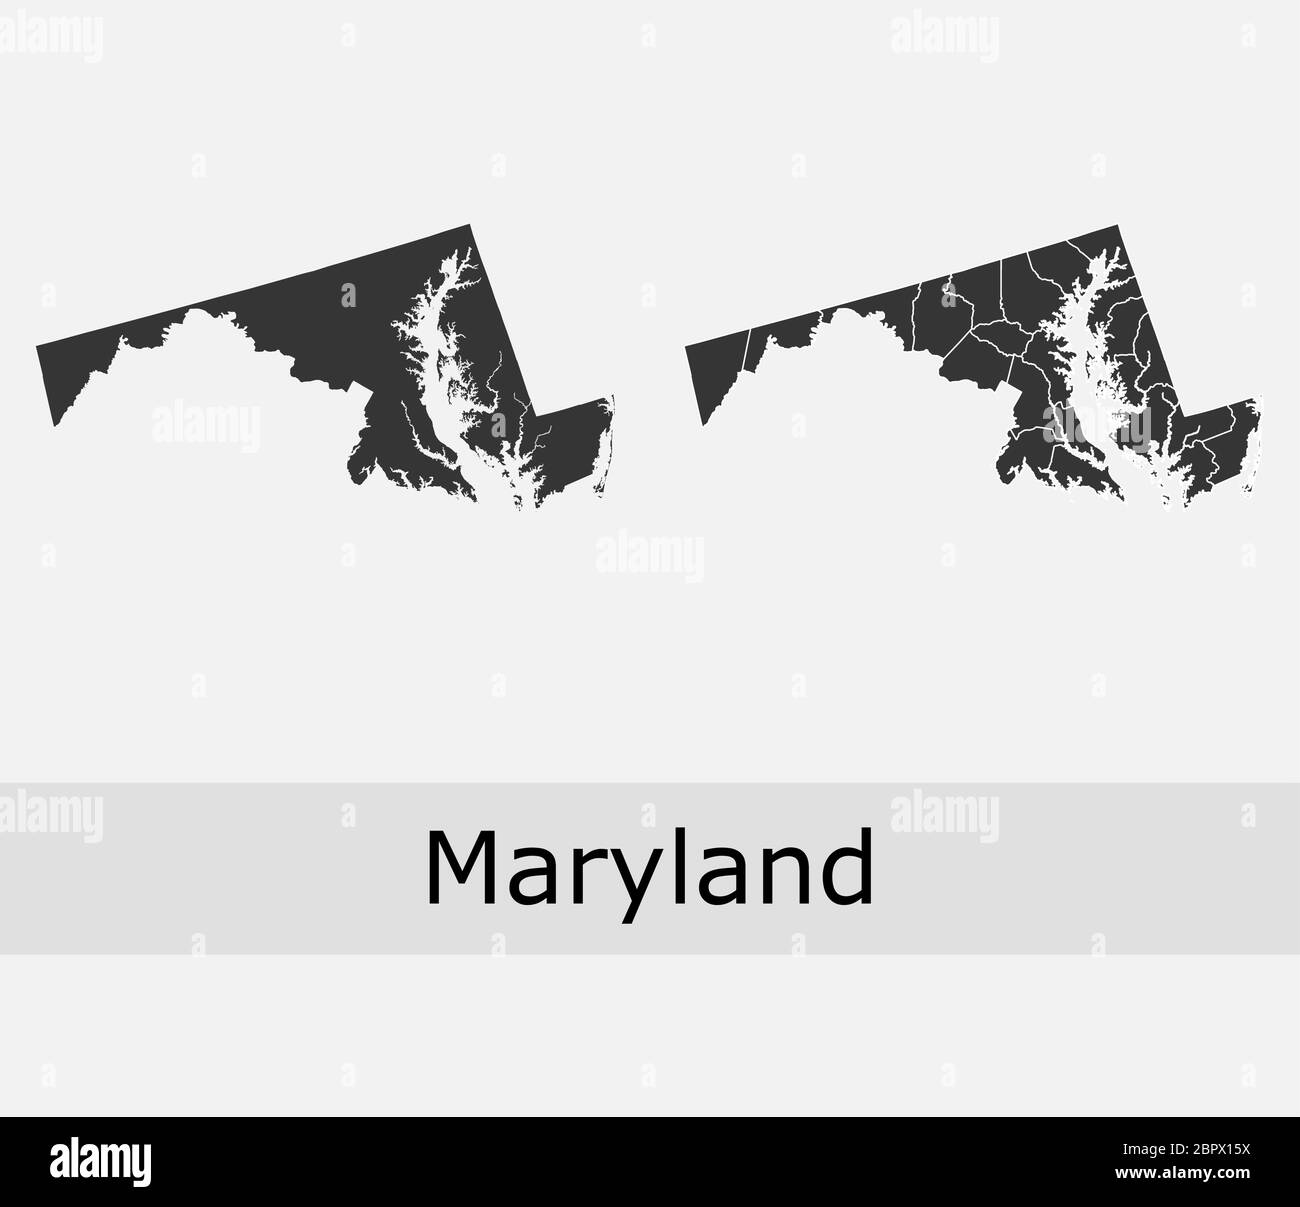 Maryland maps vector outline counties, townships, regions, municipalities, departments, borders Stock Vector